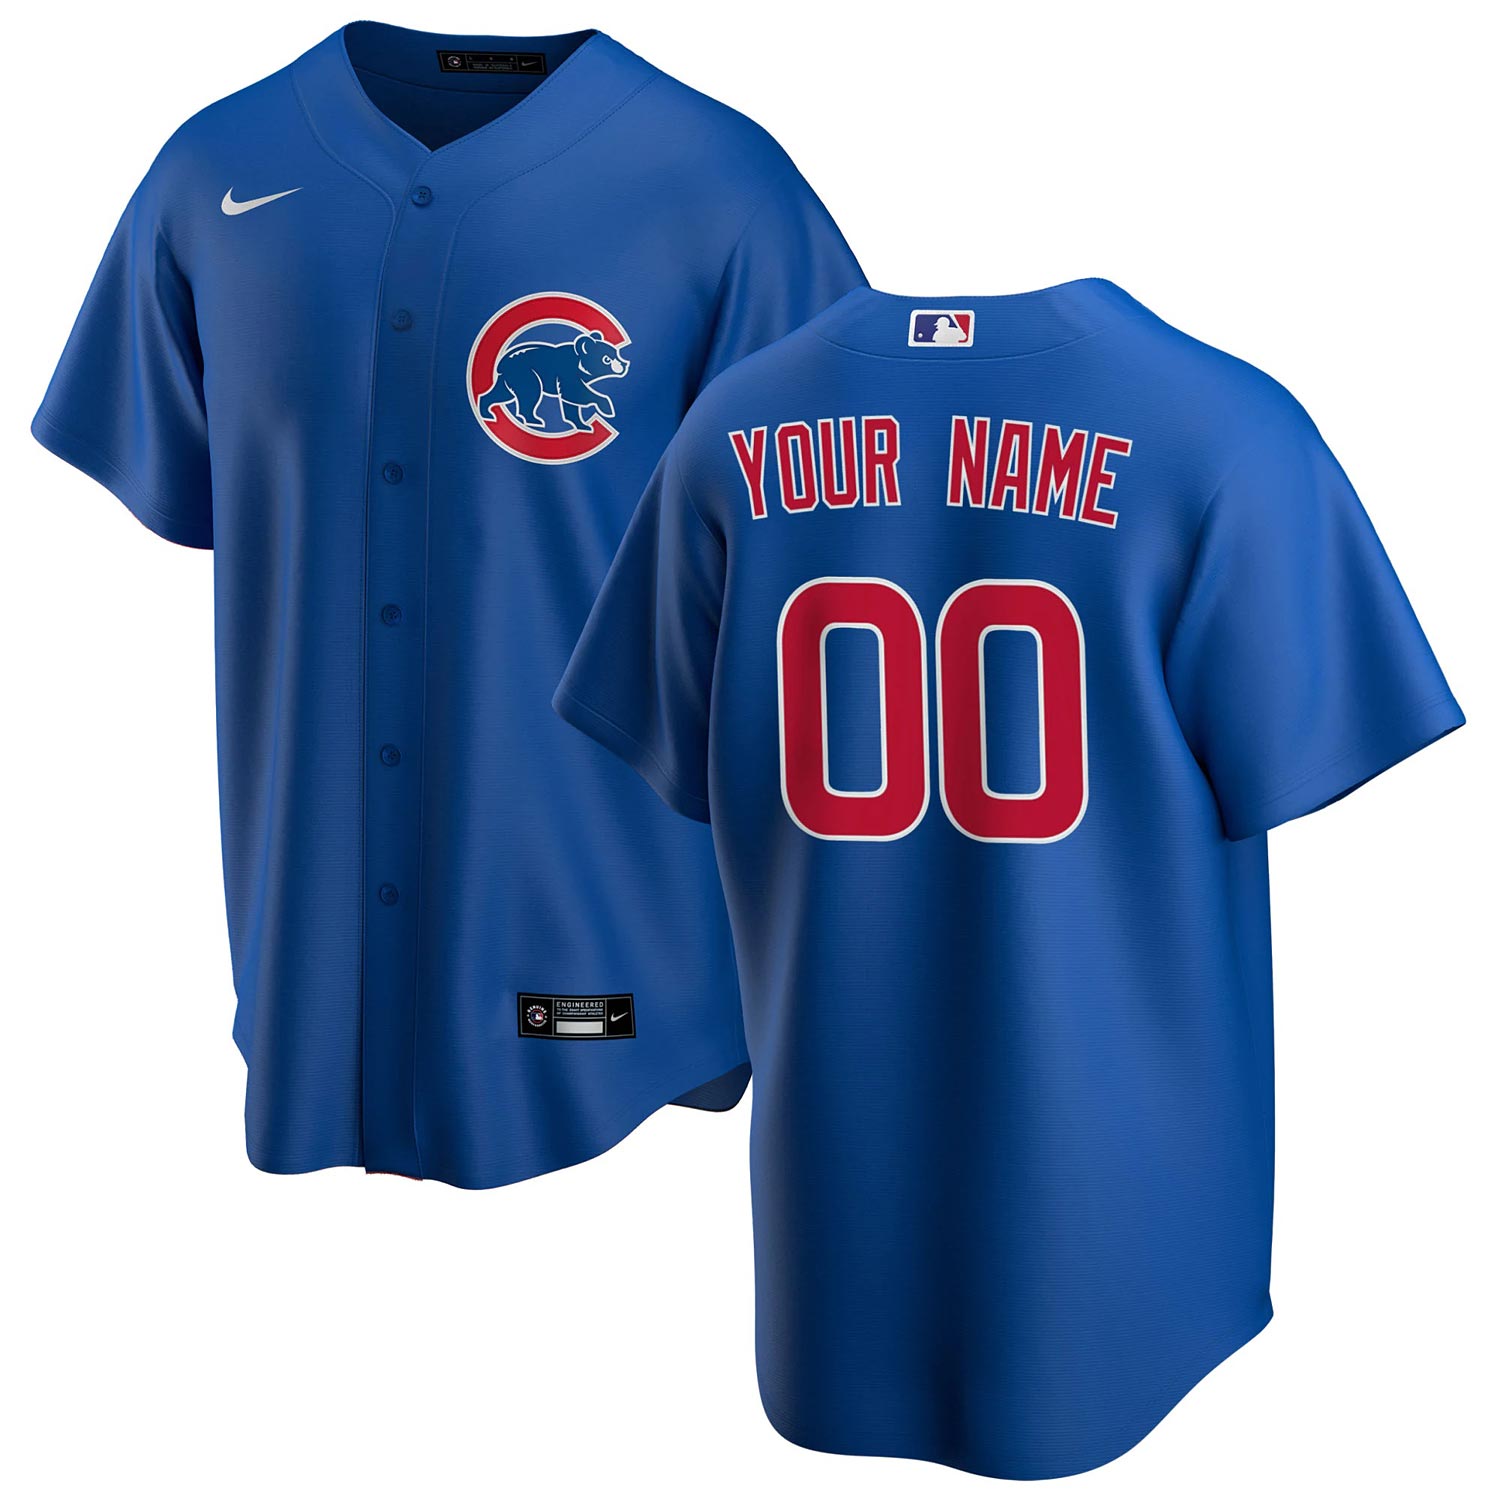 Youth Nike White Chicago Cubs Home 2020 Replica Team Jersey